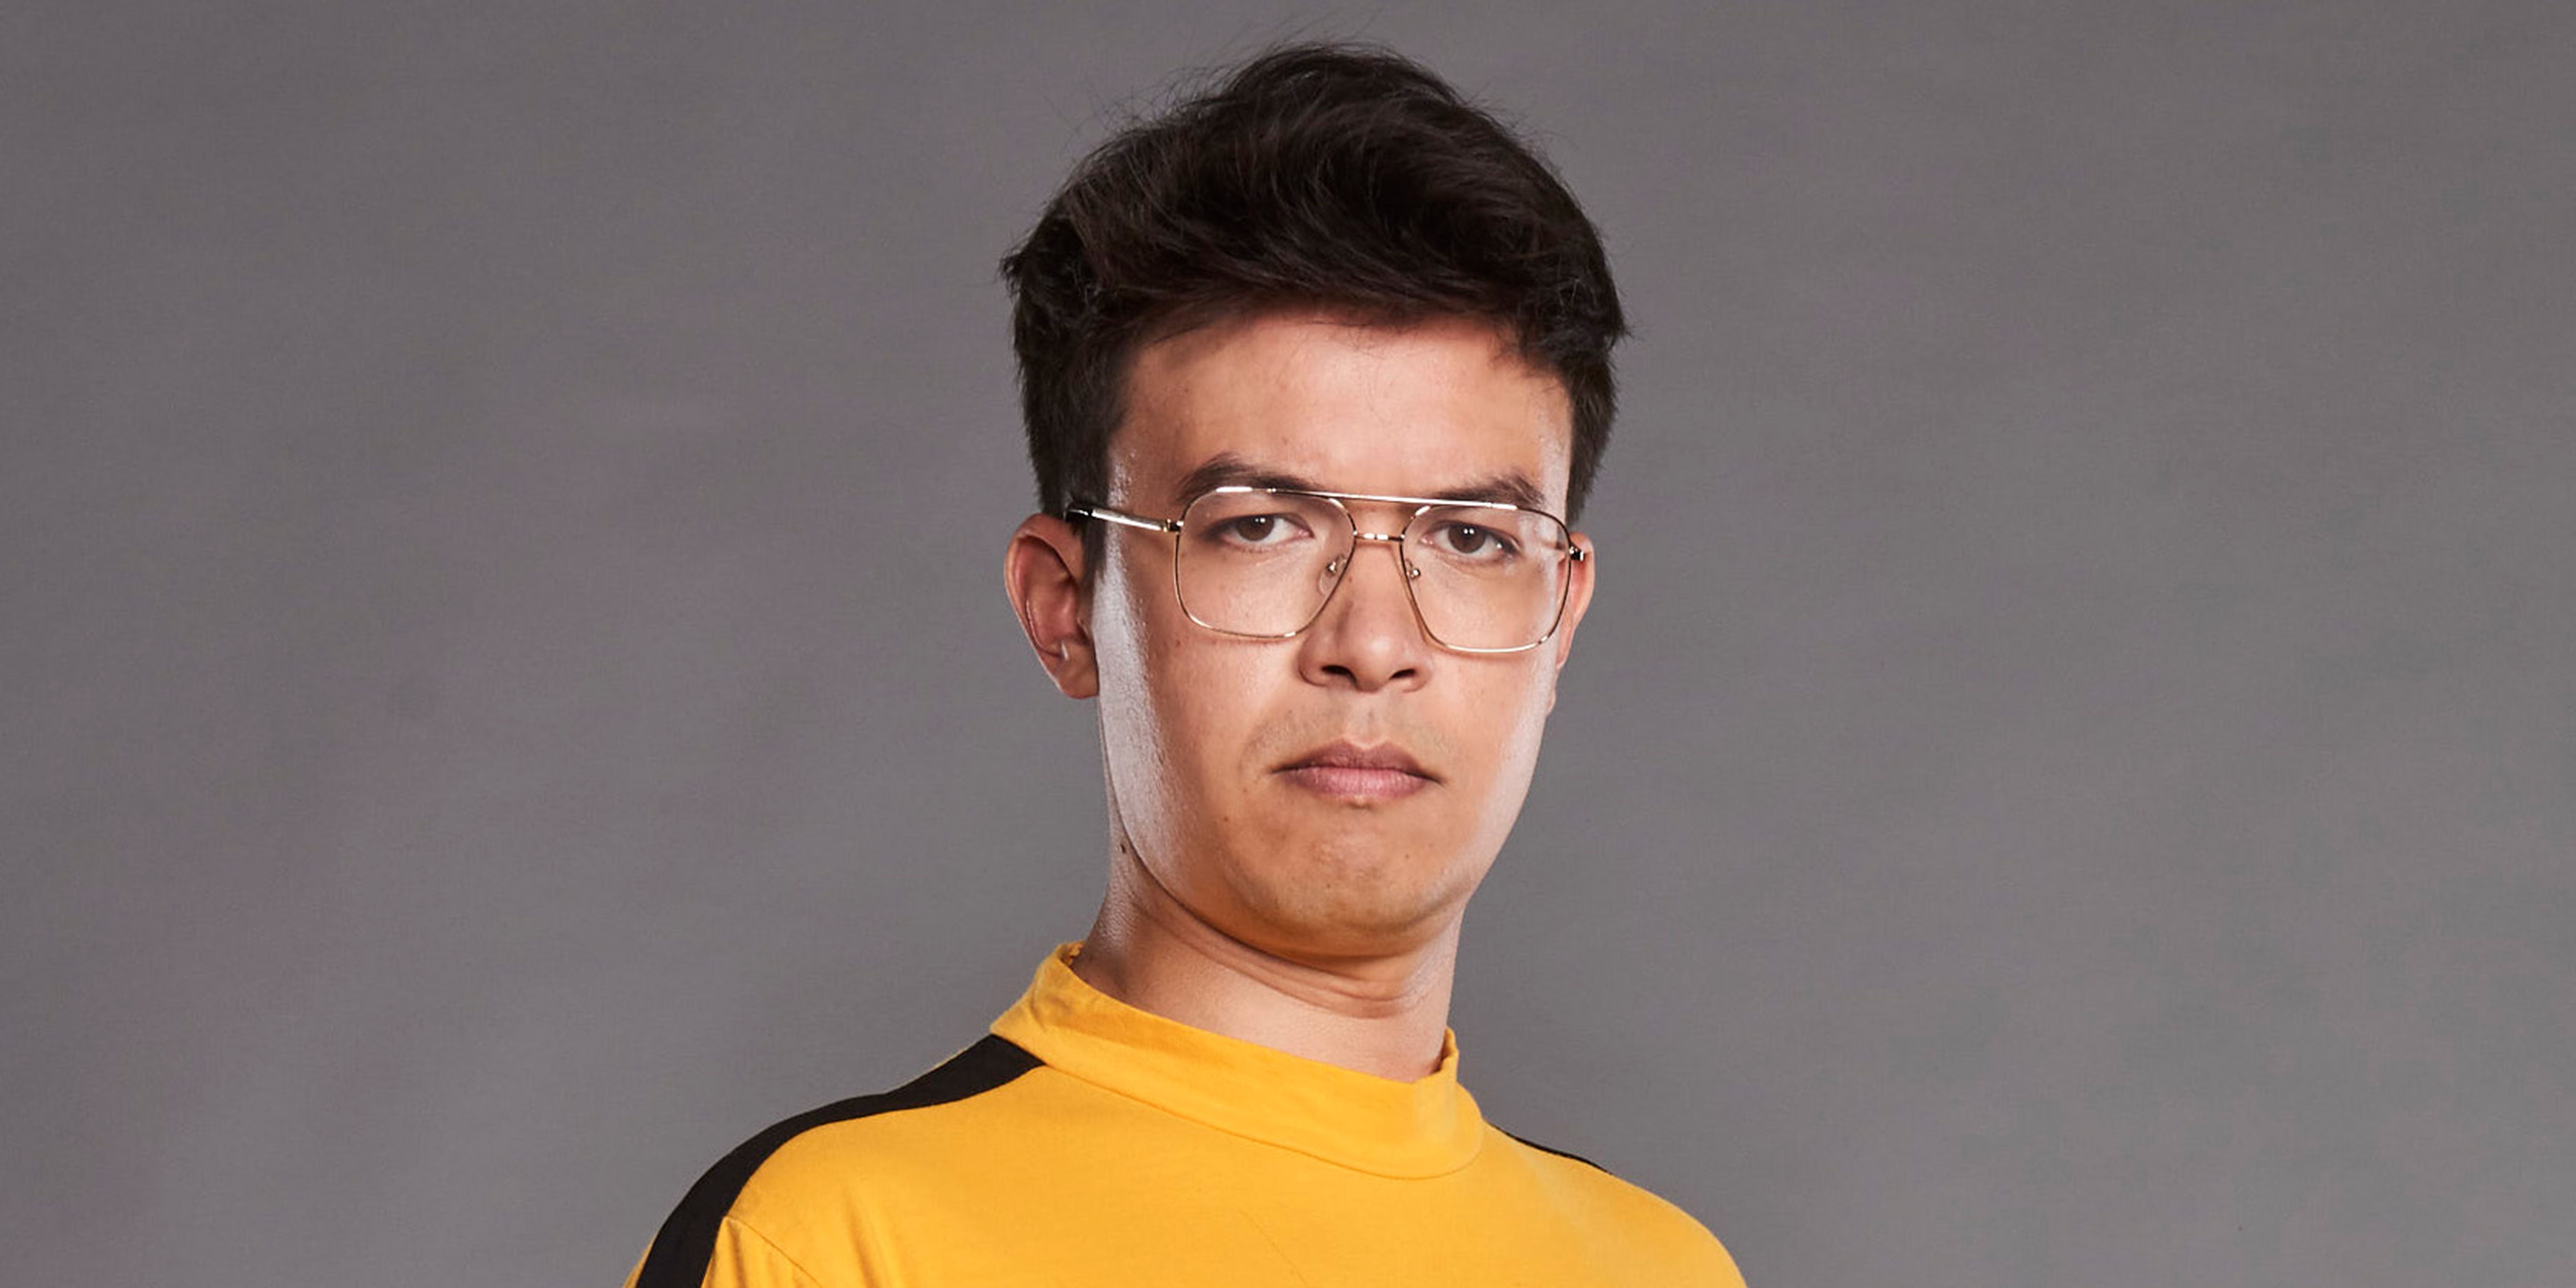 PHIL WANG TO PERFORM BRAND-NEW STAND-UP COMEDY SHOW ‘PHILLY PHILLY WANG WANG’ AT THE EDINBURGH FESTIVAL FRINGE AHEAD OF NATIONWIDE TOUR